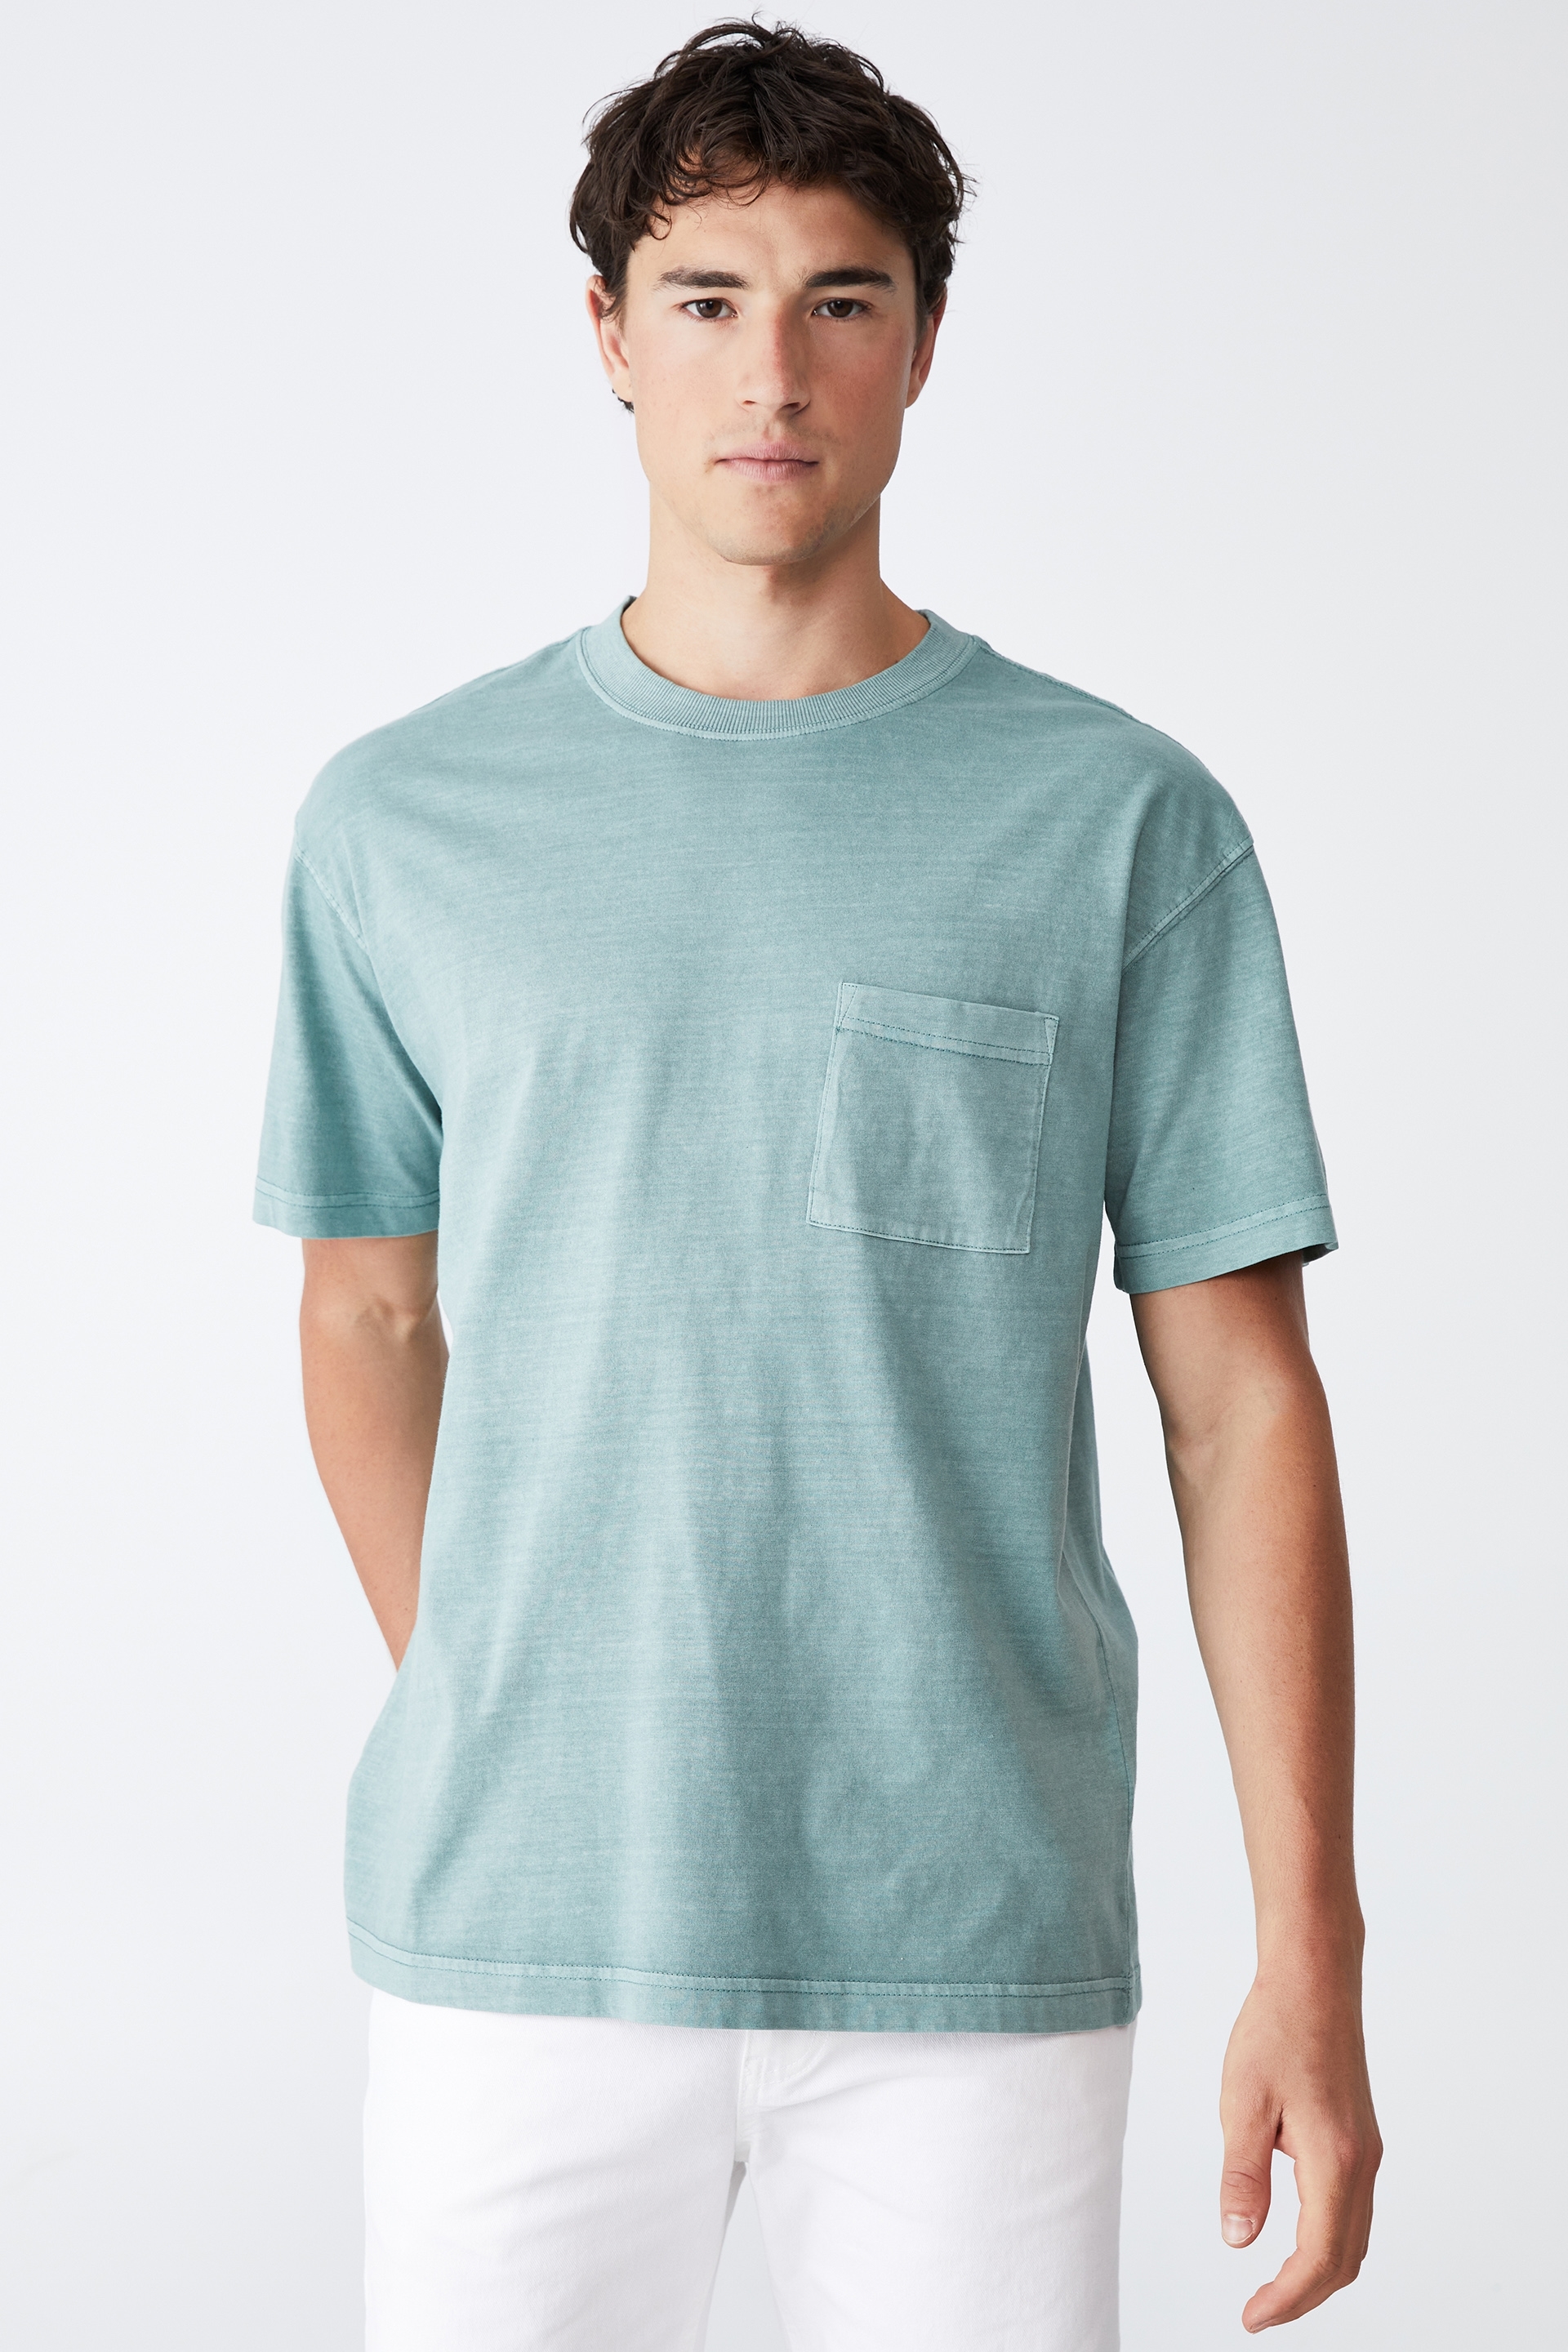 Cotton On Men - Loose Fit T-Shirt - Steel green